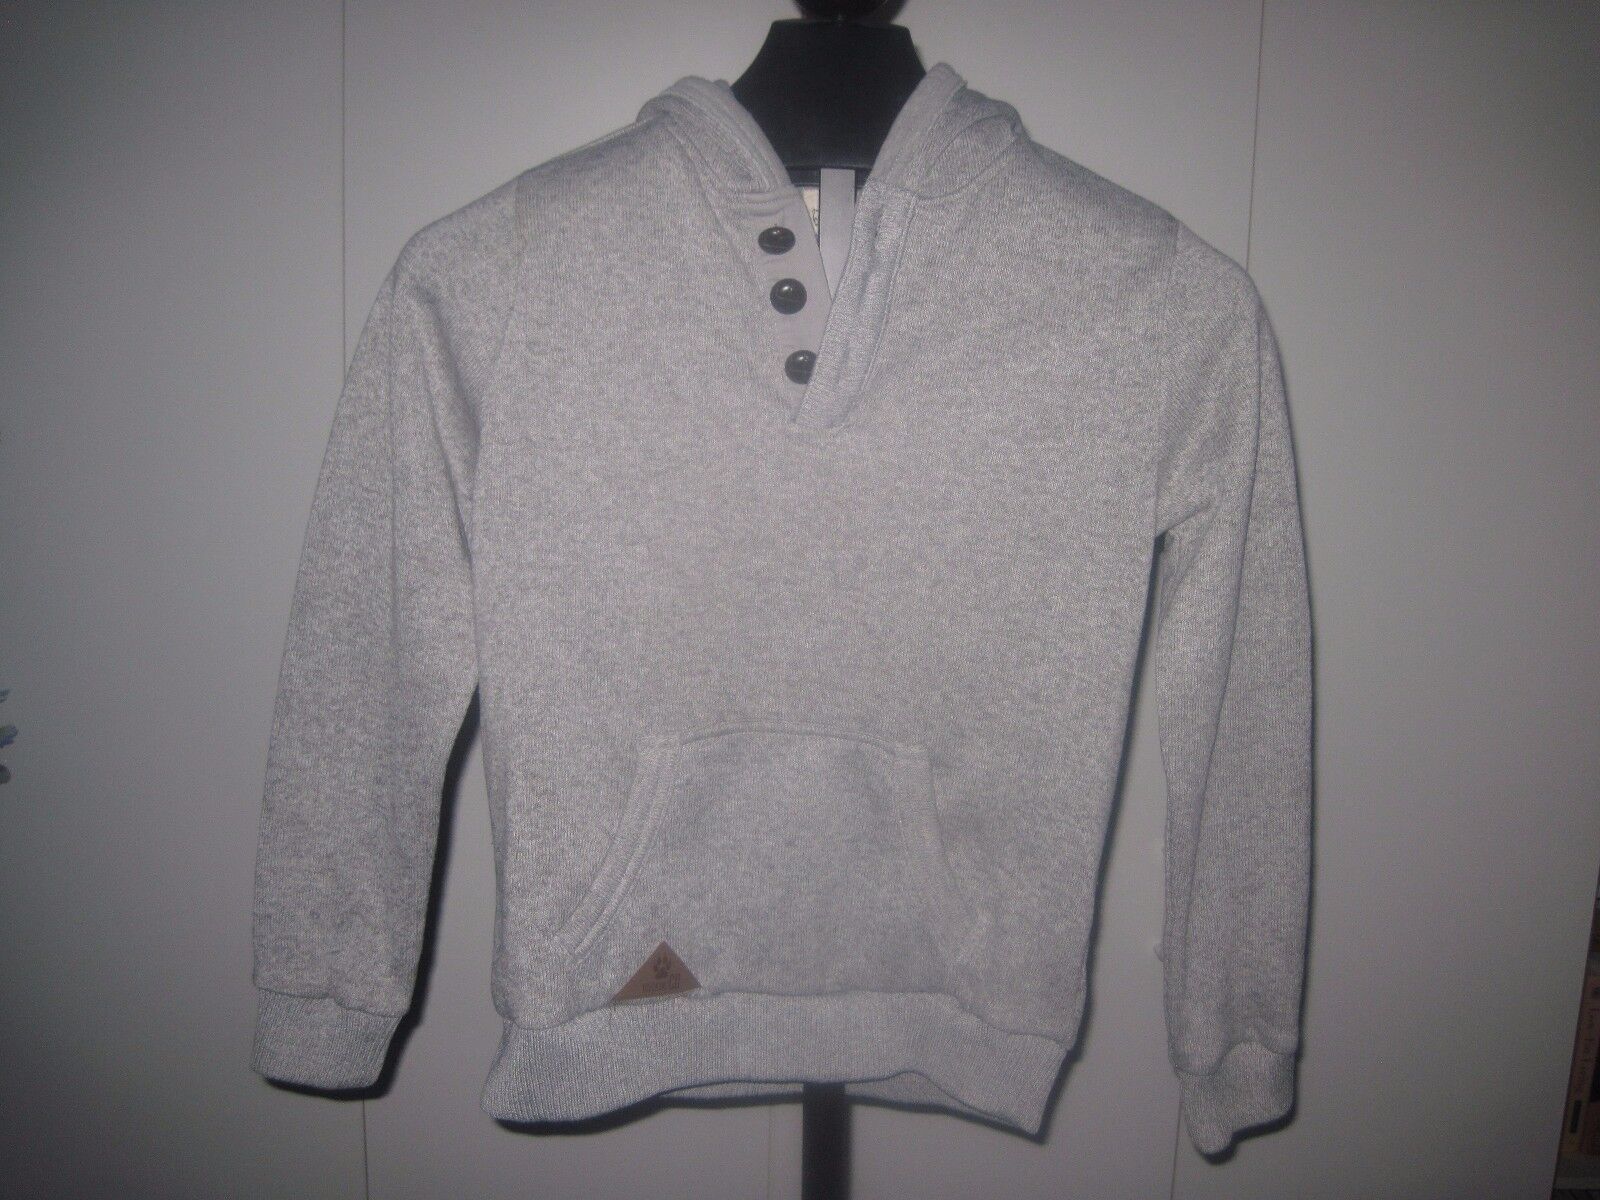 Primary image for TRECKING CO. COOL CLUB TEEN Sz. 13(158 EURO) GRAY HOODIE-HEAVY/WARM-WORN ONCE